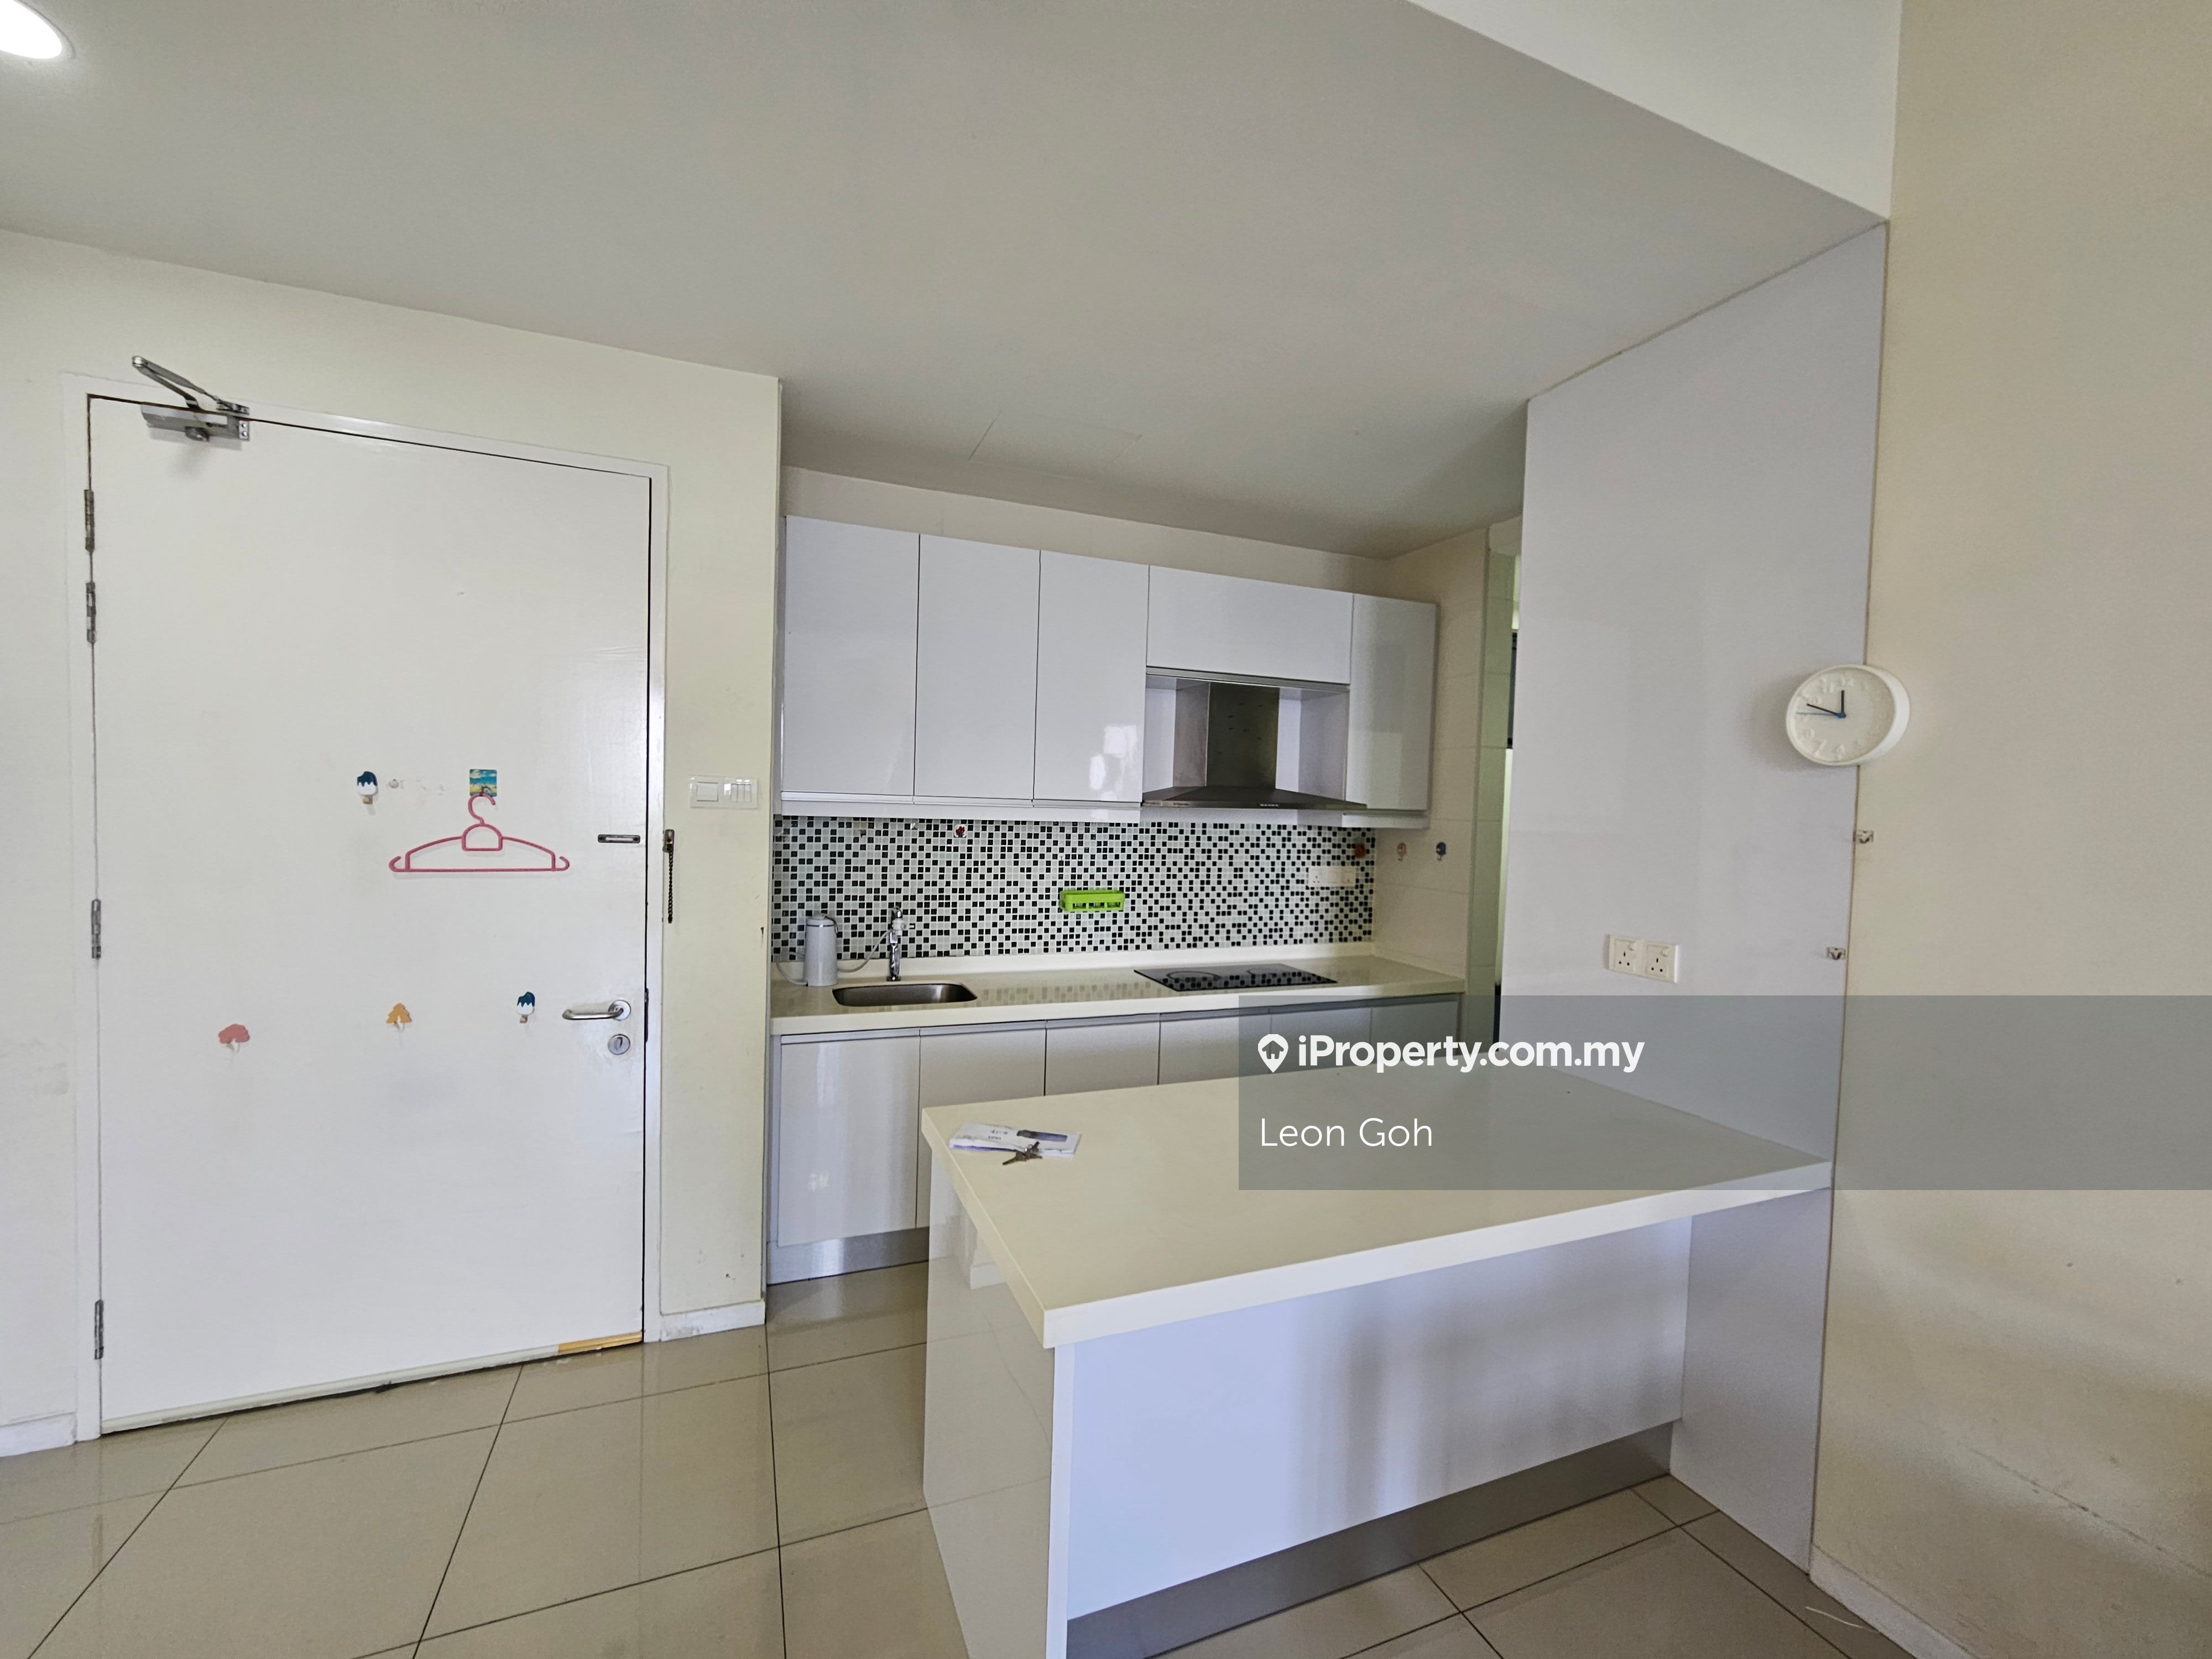 Ku Suites Intermediate Serviced Residence 1 bedroom for rent in Shah ...